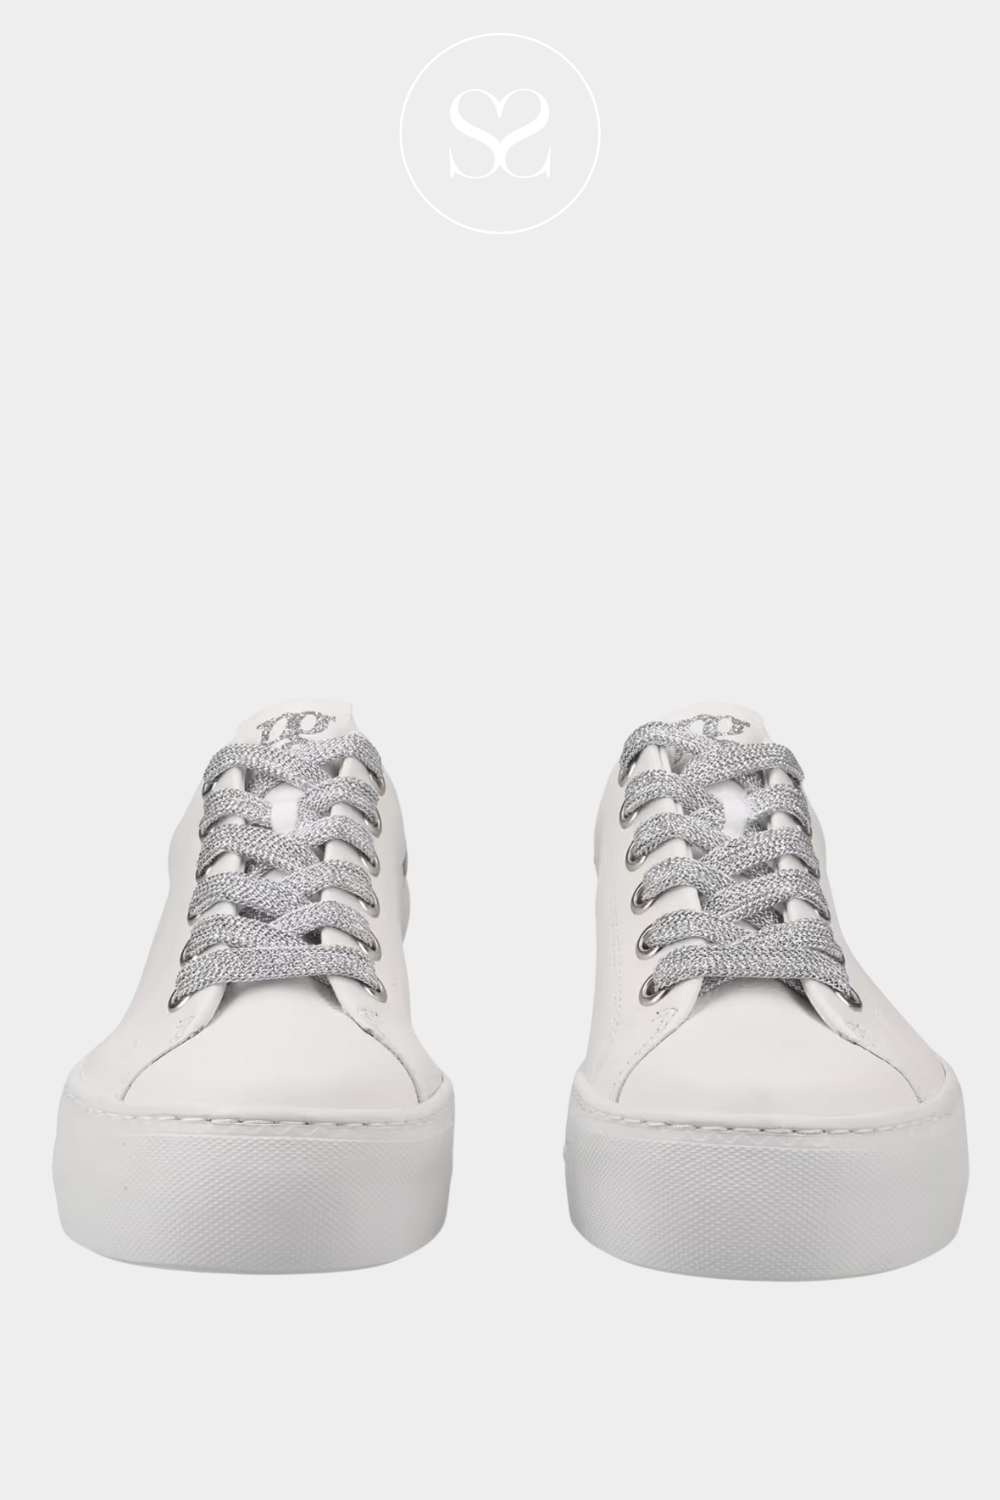 PAUL GREEN 5320 WHITE FLATFORM LACE TRAINERS WITH SILVER LACES